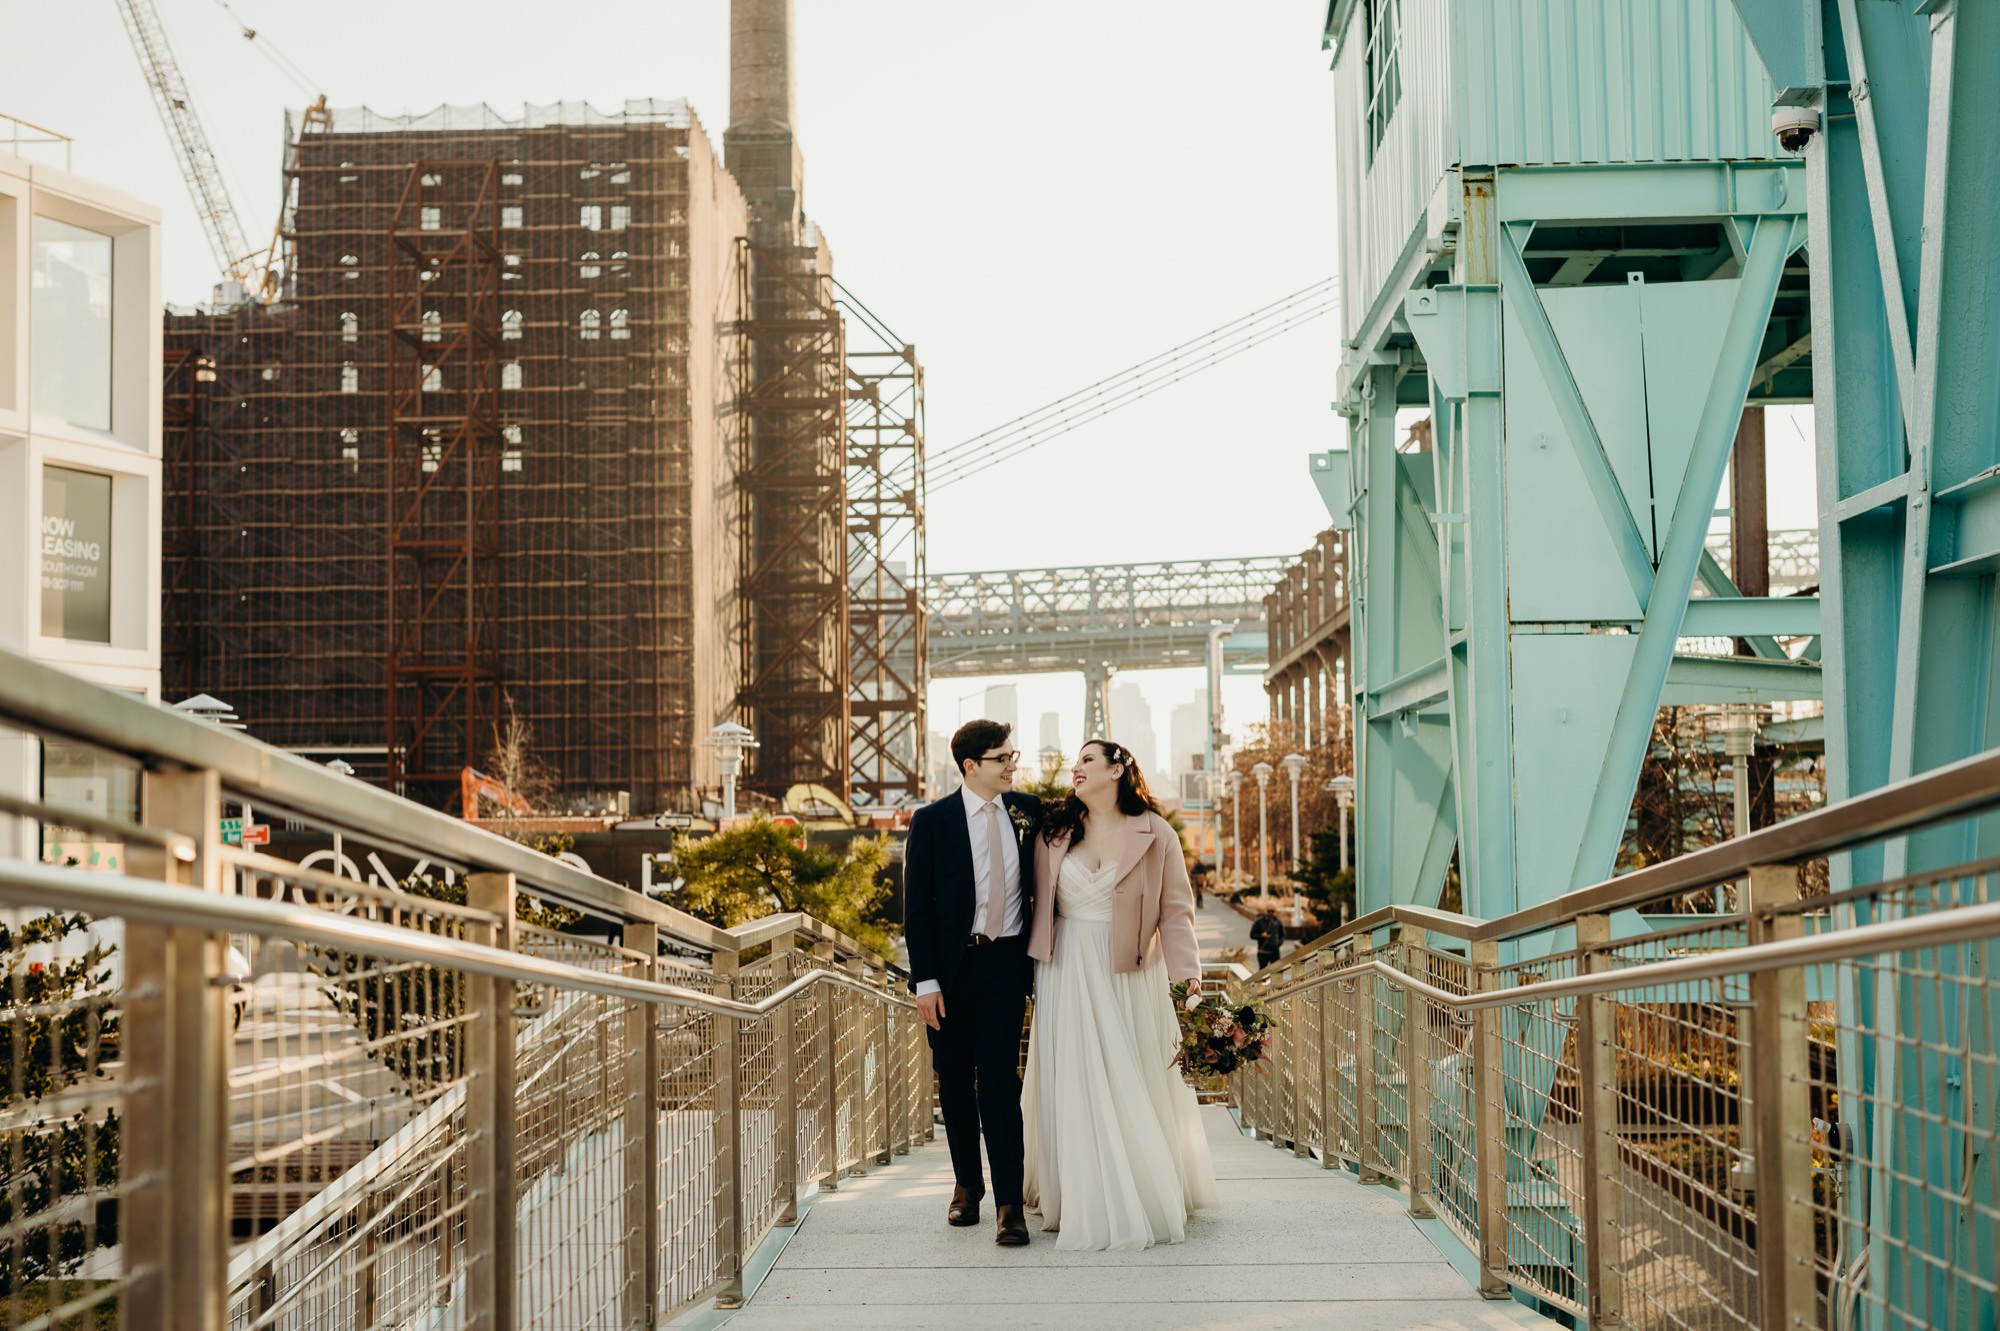 bride and groom wedding portraits at domino park in brooklyn, nyc